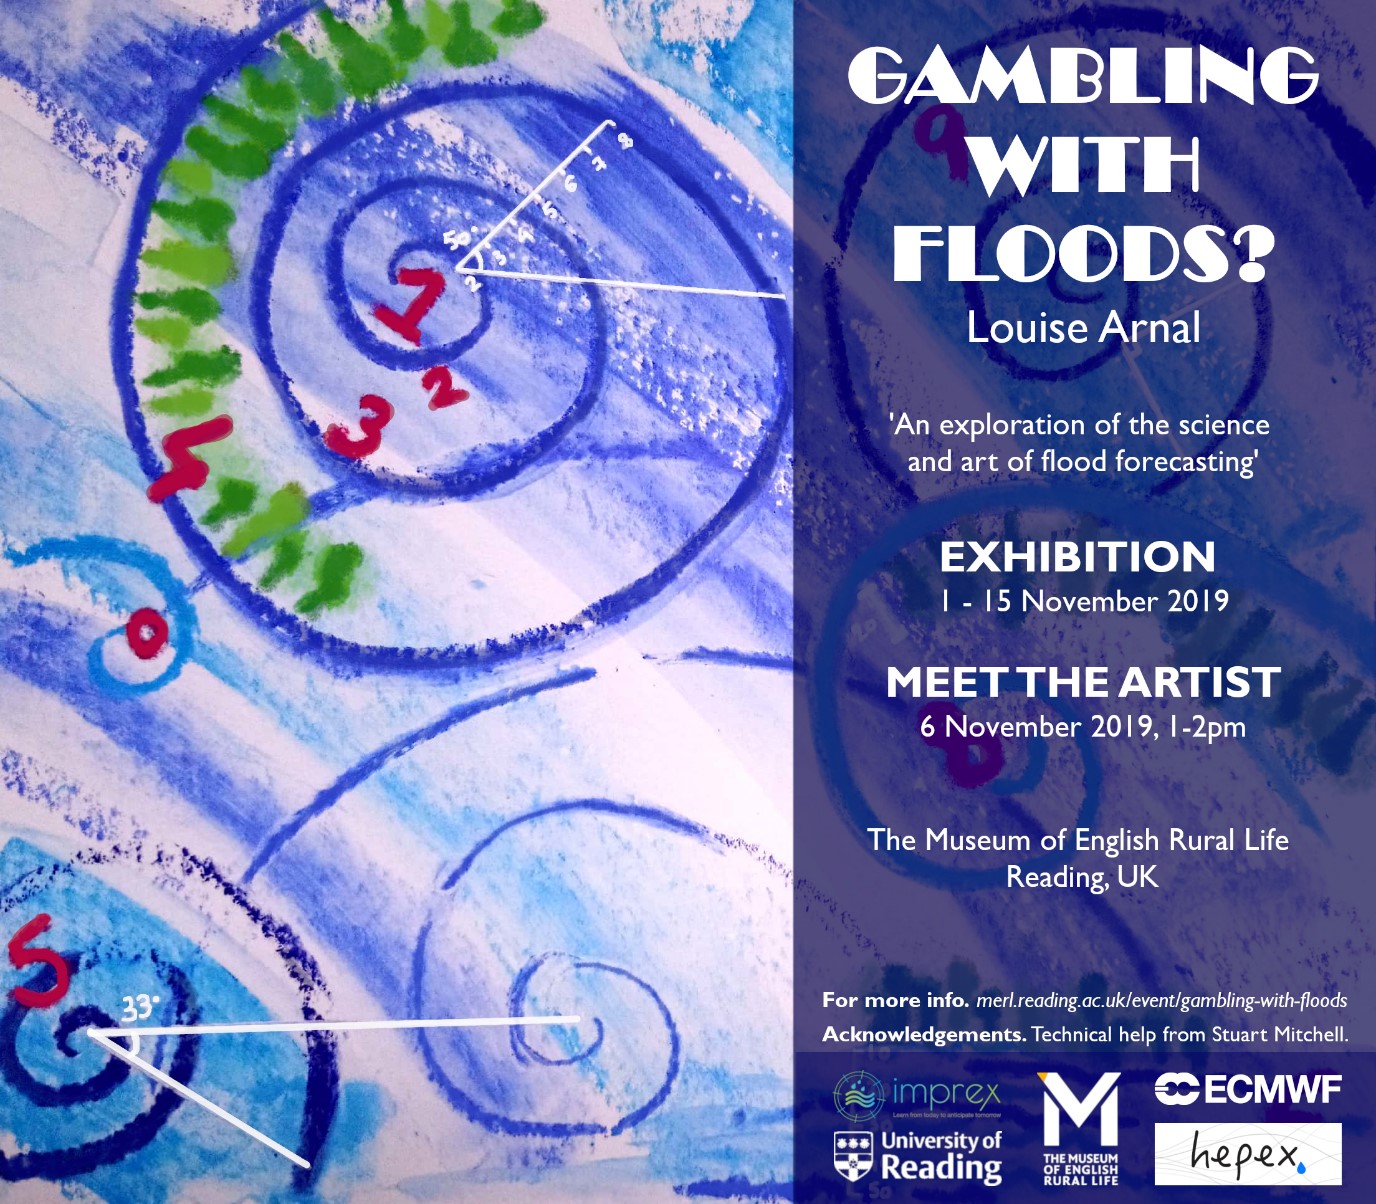 A flyer created to promote the exhibition.